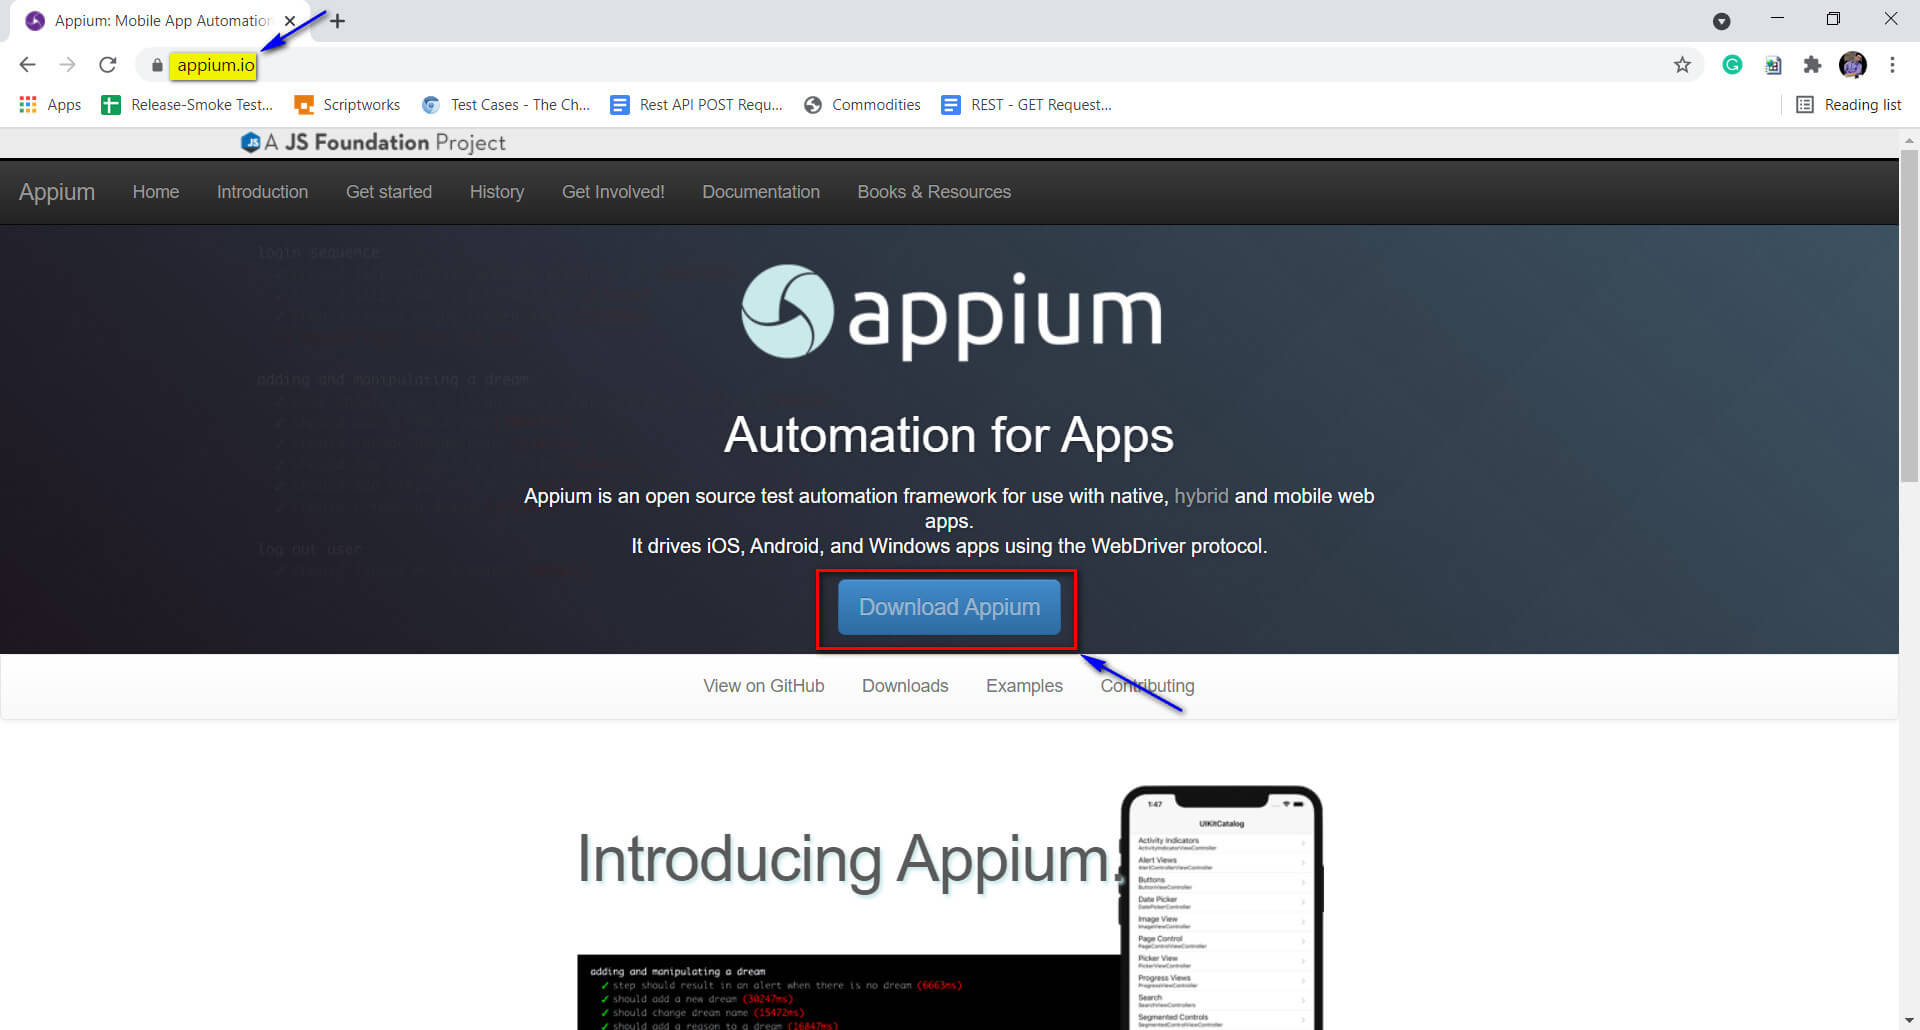 click on download appium button